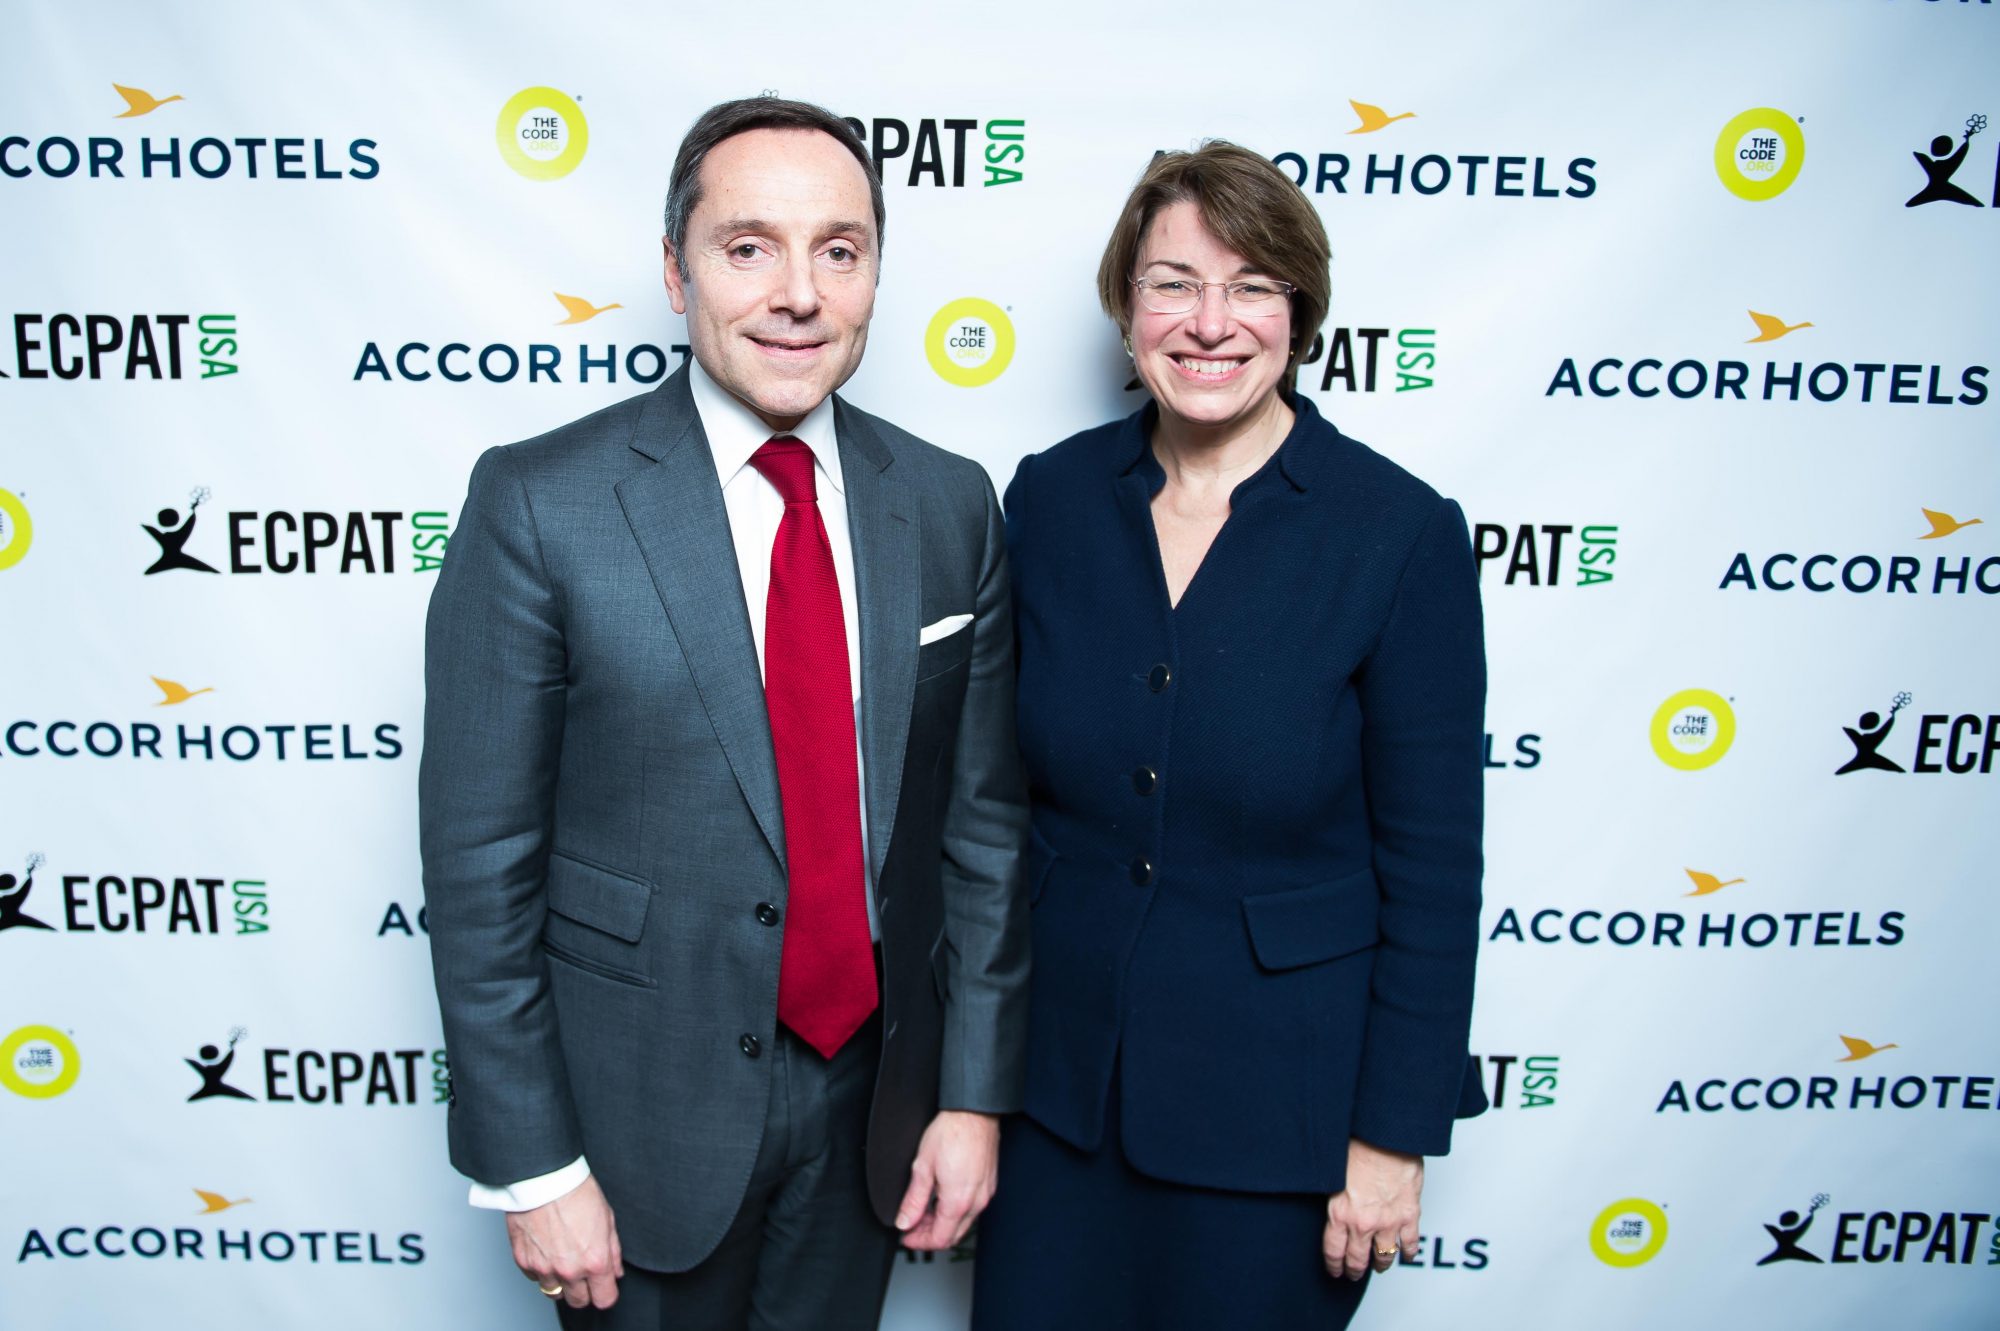 Christophe Alaux, AccorHotels CEO North America, Central America and Caribbean and Senator Amy Klobuchar (D-MN) - AccorHotels Signs The Code.jpg